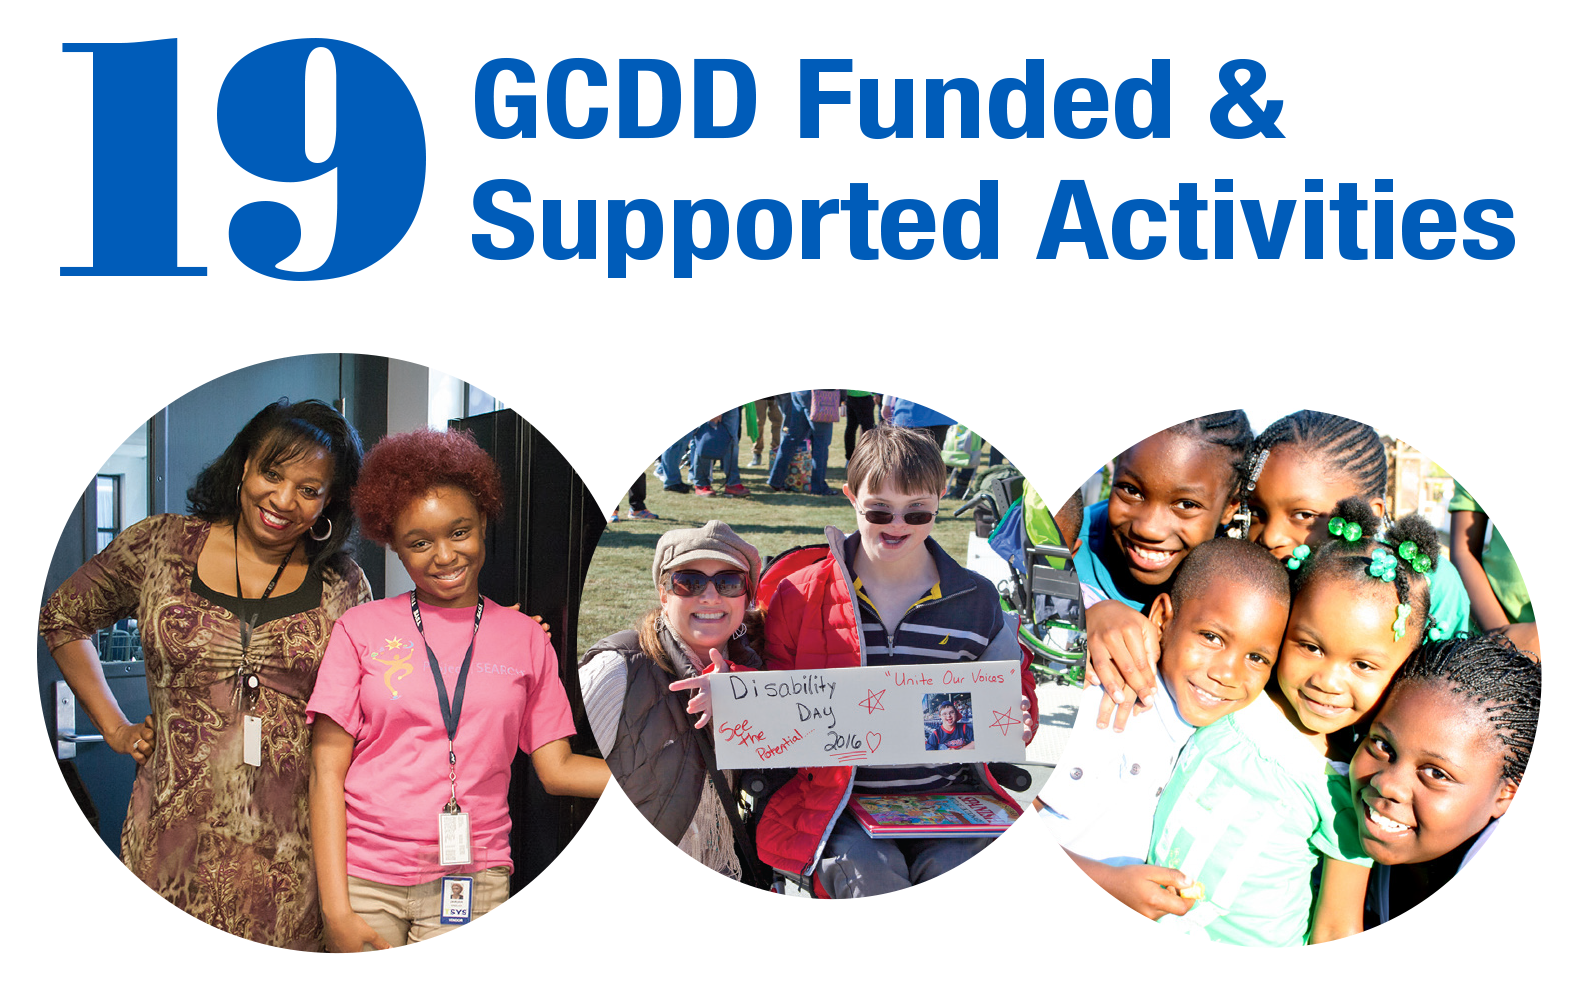 19 GCDD Funded and Supported Activities FY2016, photos from Project SEARCH, Disability Day and Real Communities